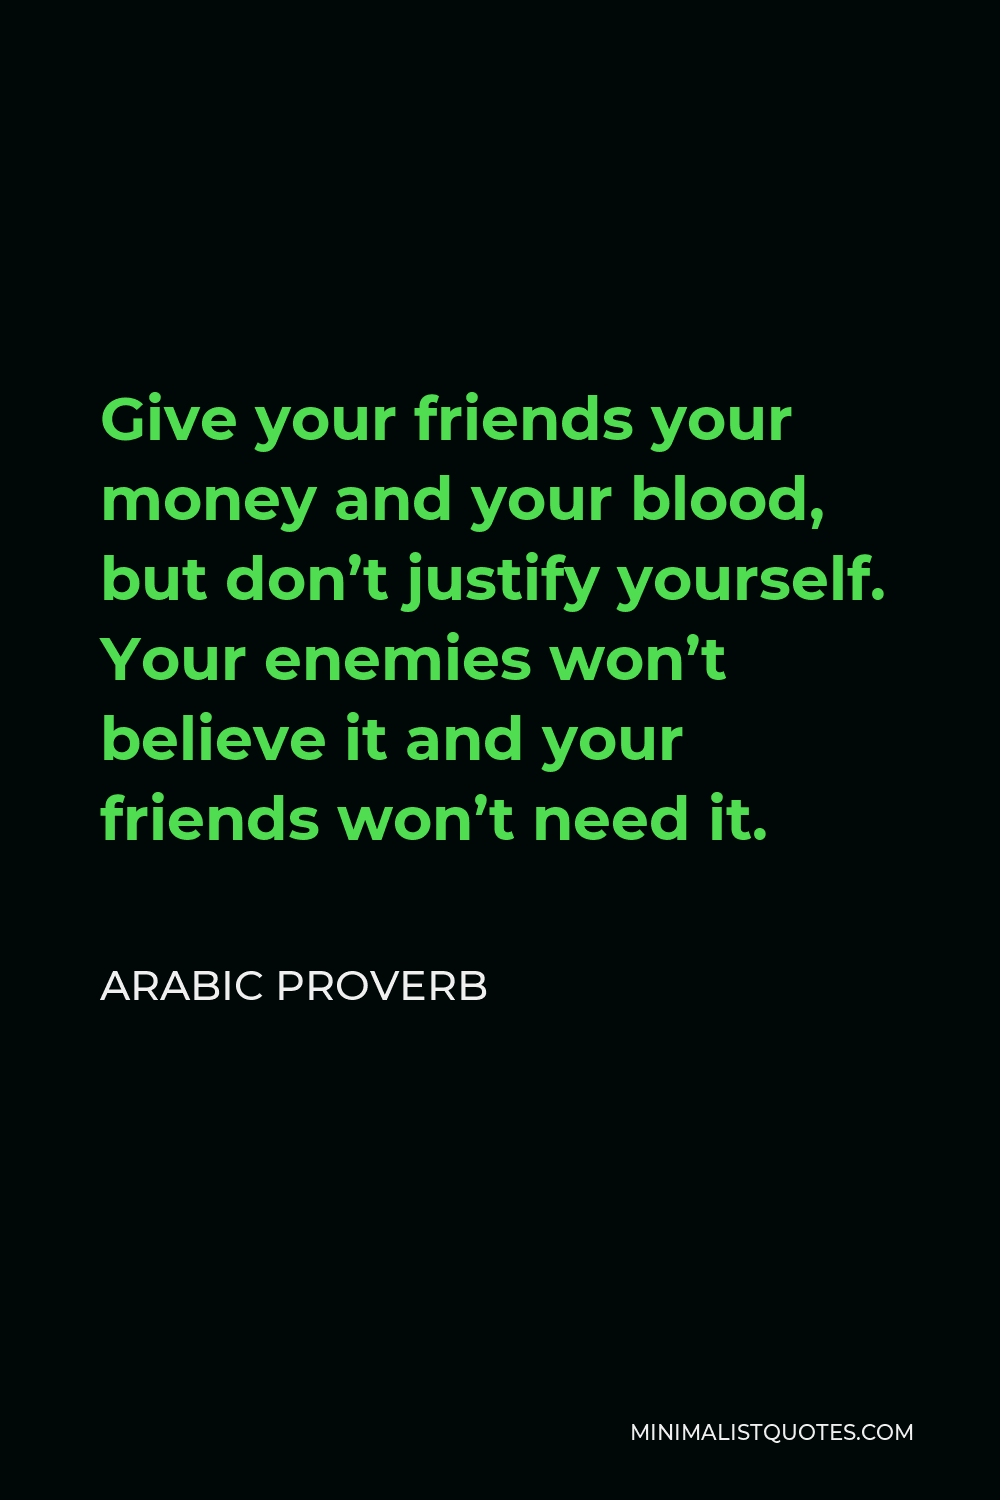 Arabic Proverb Quote - Give your friends your money and your blood, but don’t justify yourself. Your enemies won’t believe it and your friends won’t need it.